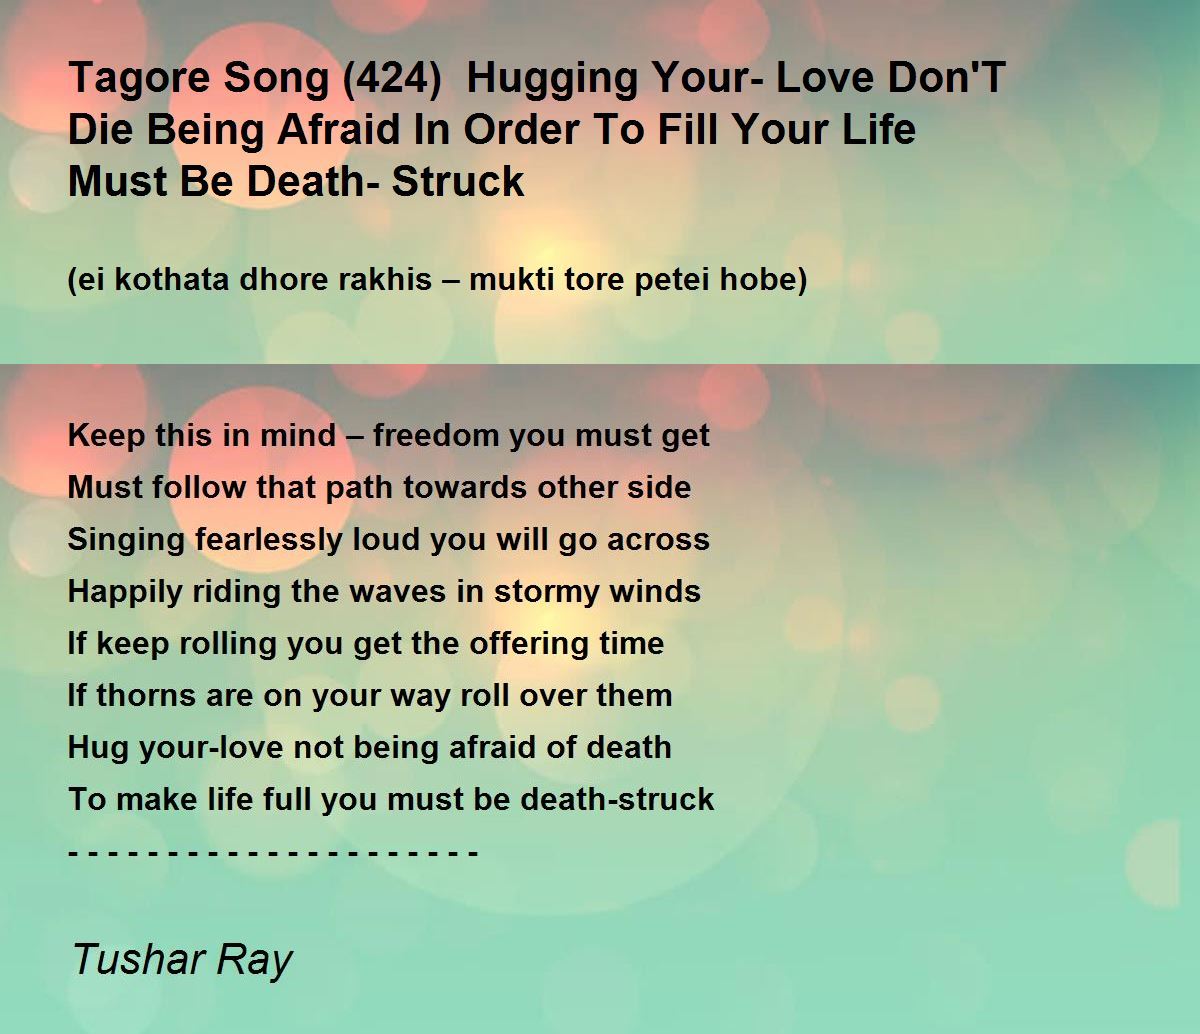 Tagore Song (#77) Beyond The Boundary Of Life And Death - Tagore Song (#77) Beyond  The Boundary Of Life And Death Poem by Tushar Ray